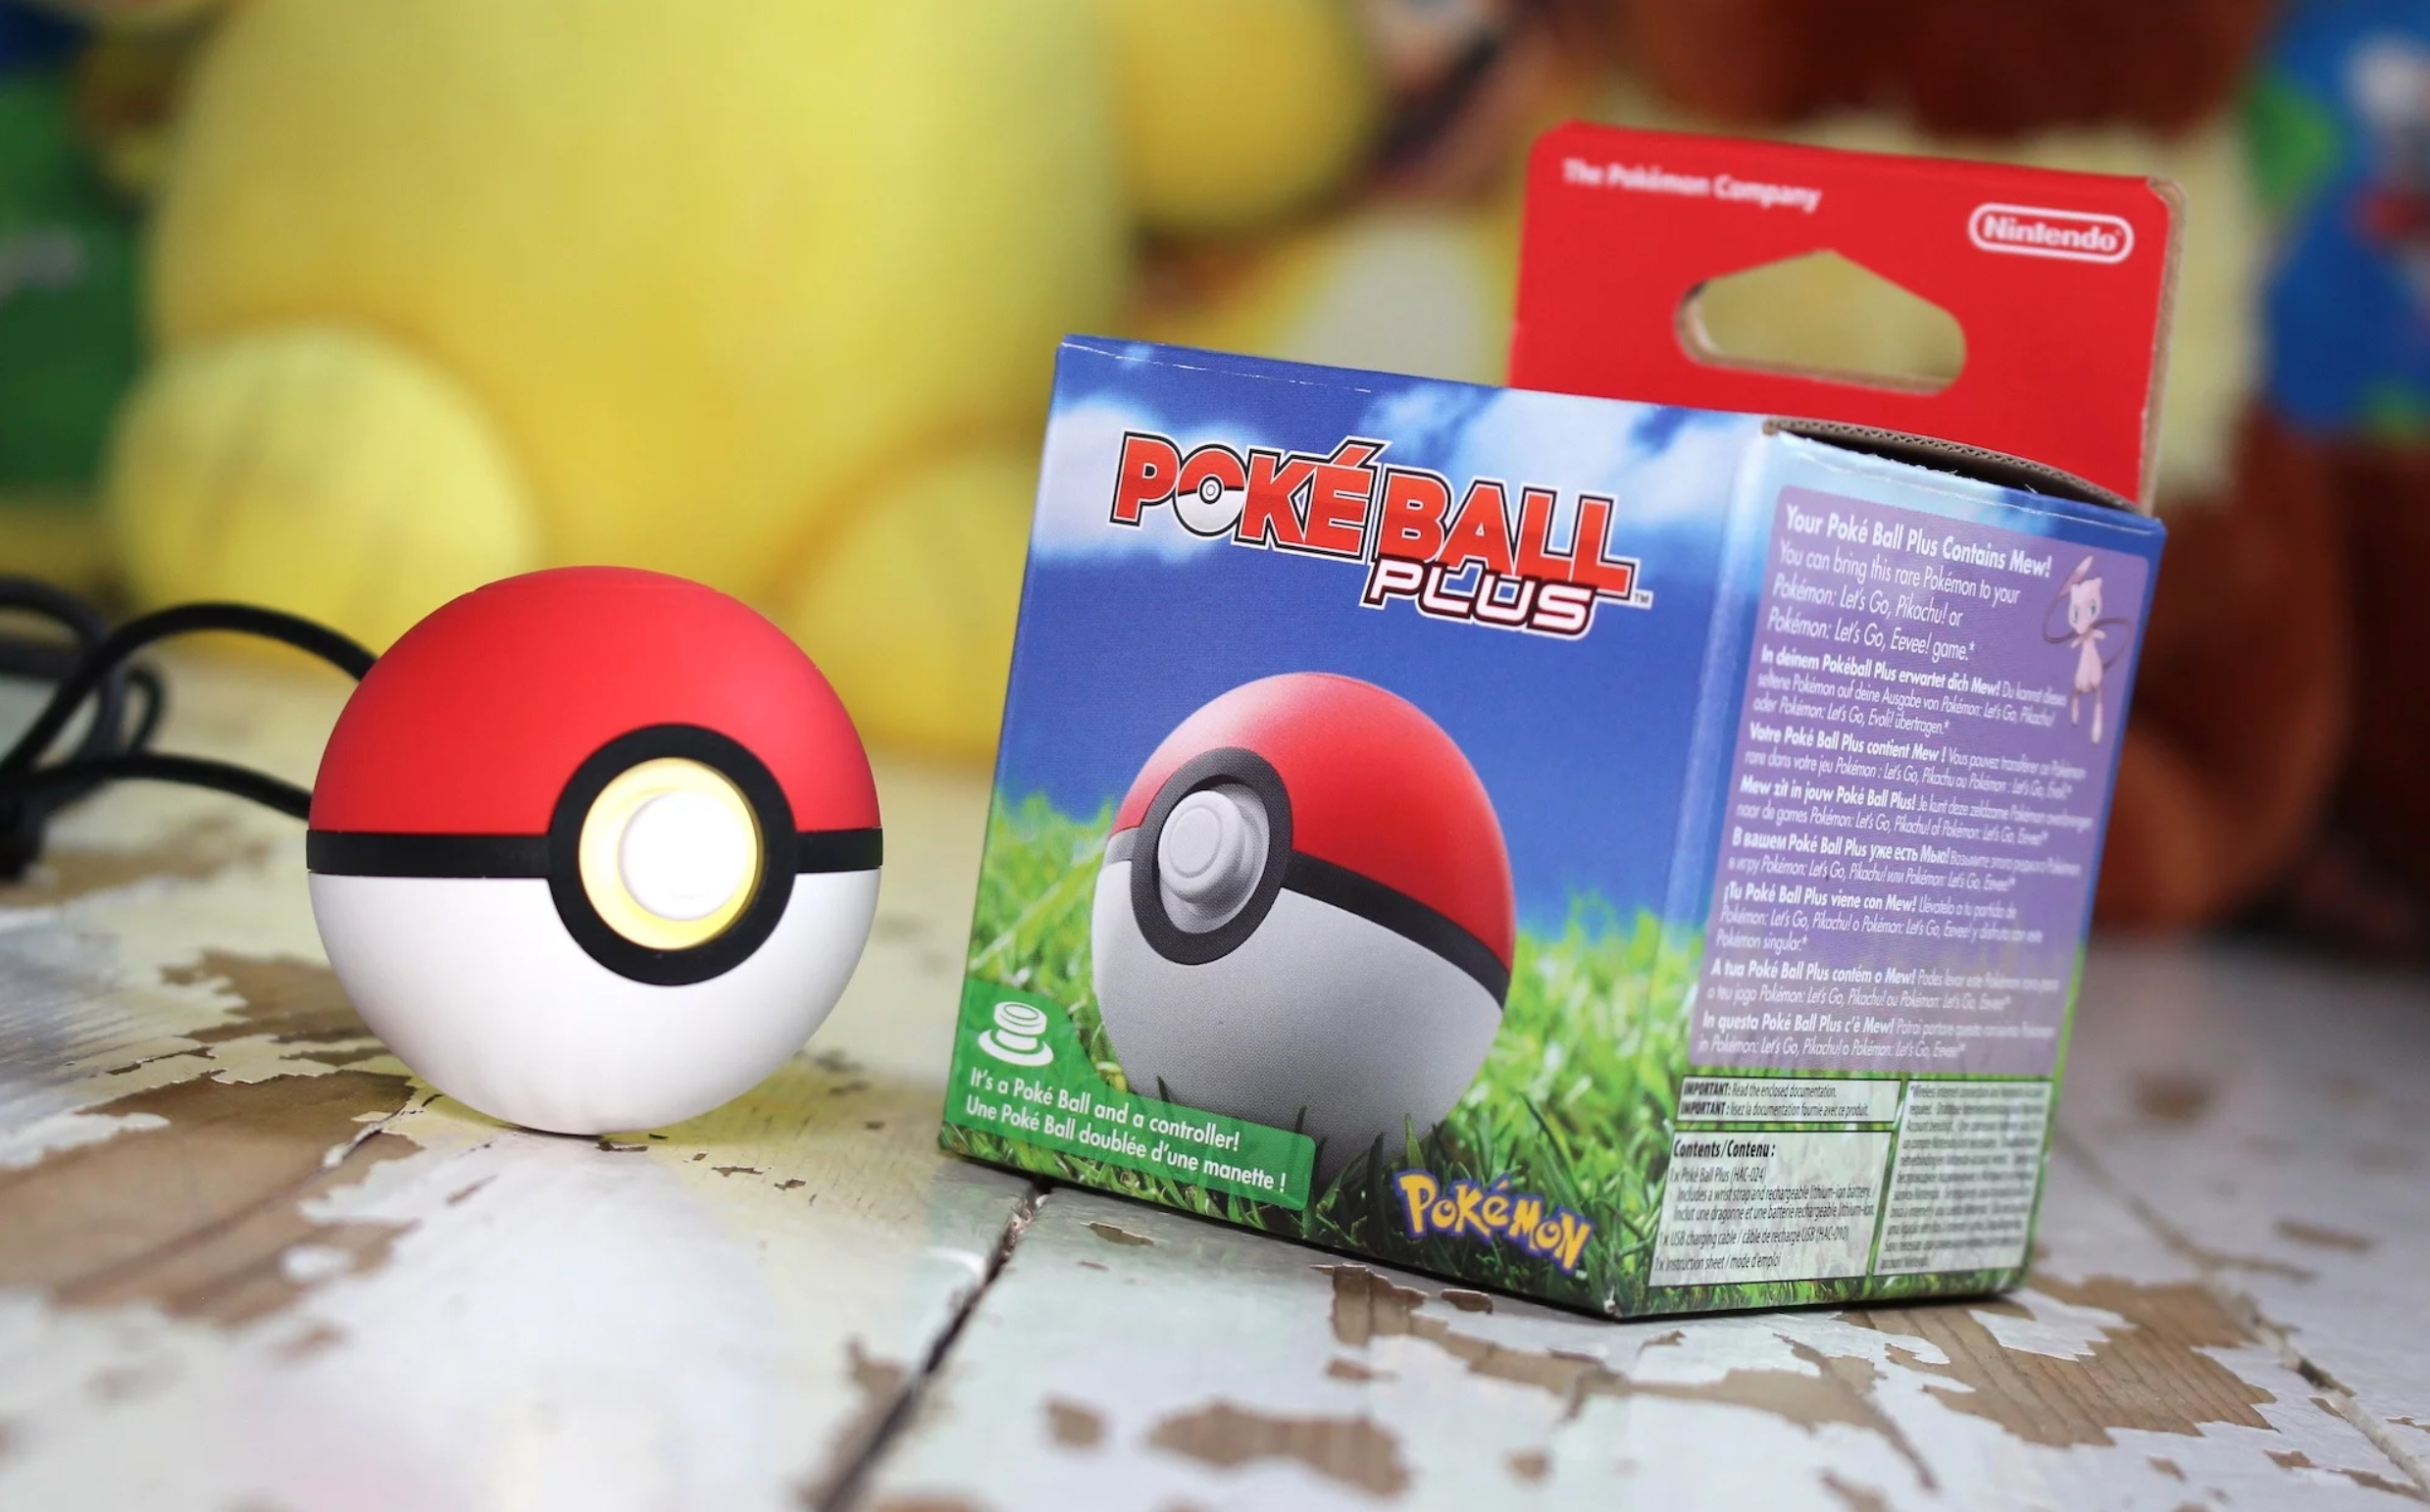 How To Make A Origami Pokeball That Opens How To Connect Your Pok Ball Plus To Pokmon Go On Ios And Android